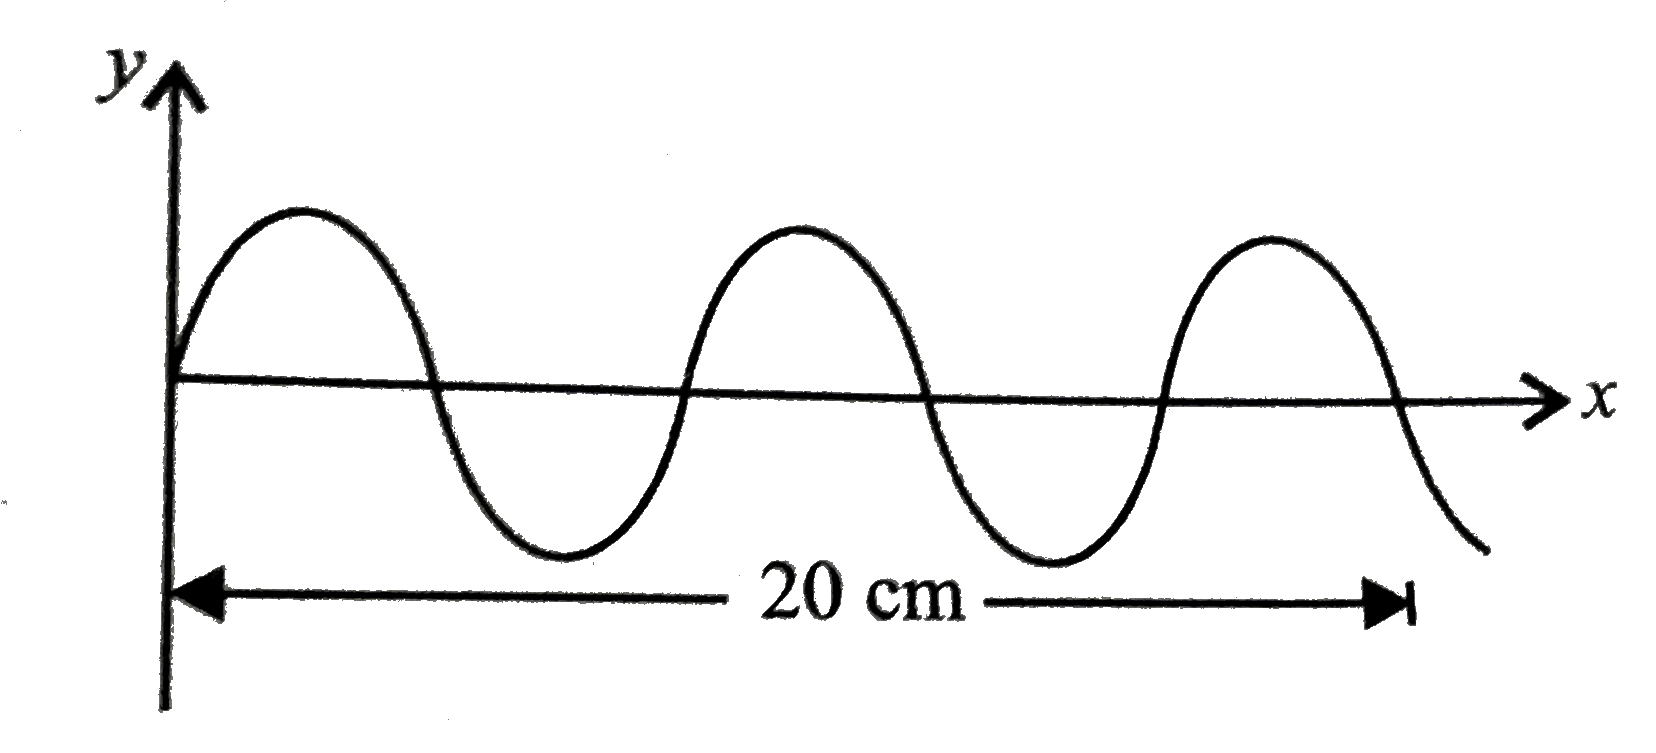 Figure given shows a sinusoidal wave on a string. If the frequency of the wave is 150 Hz, what is the velocity and wavelength of the given wave?